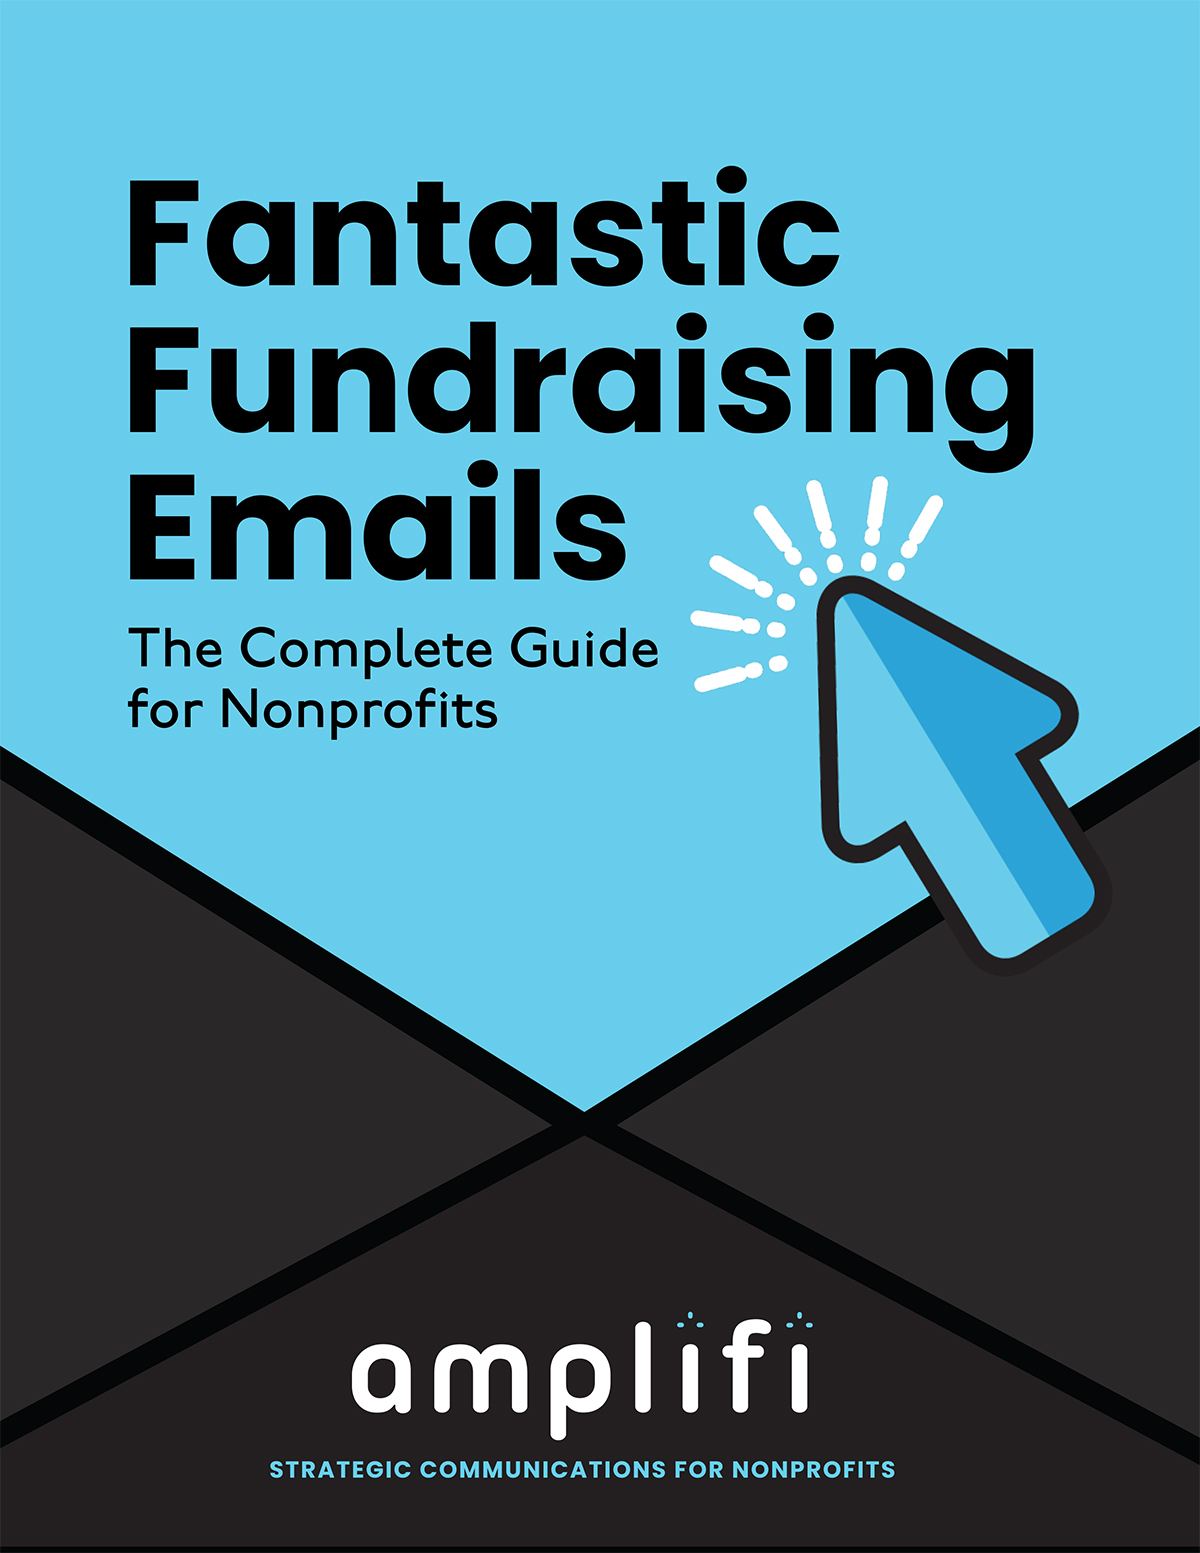 eBook: Fantastic Fundraising Emails: The Complete Guide for Nonprofits